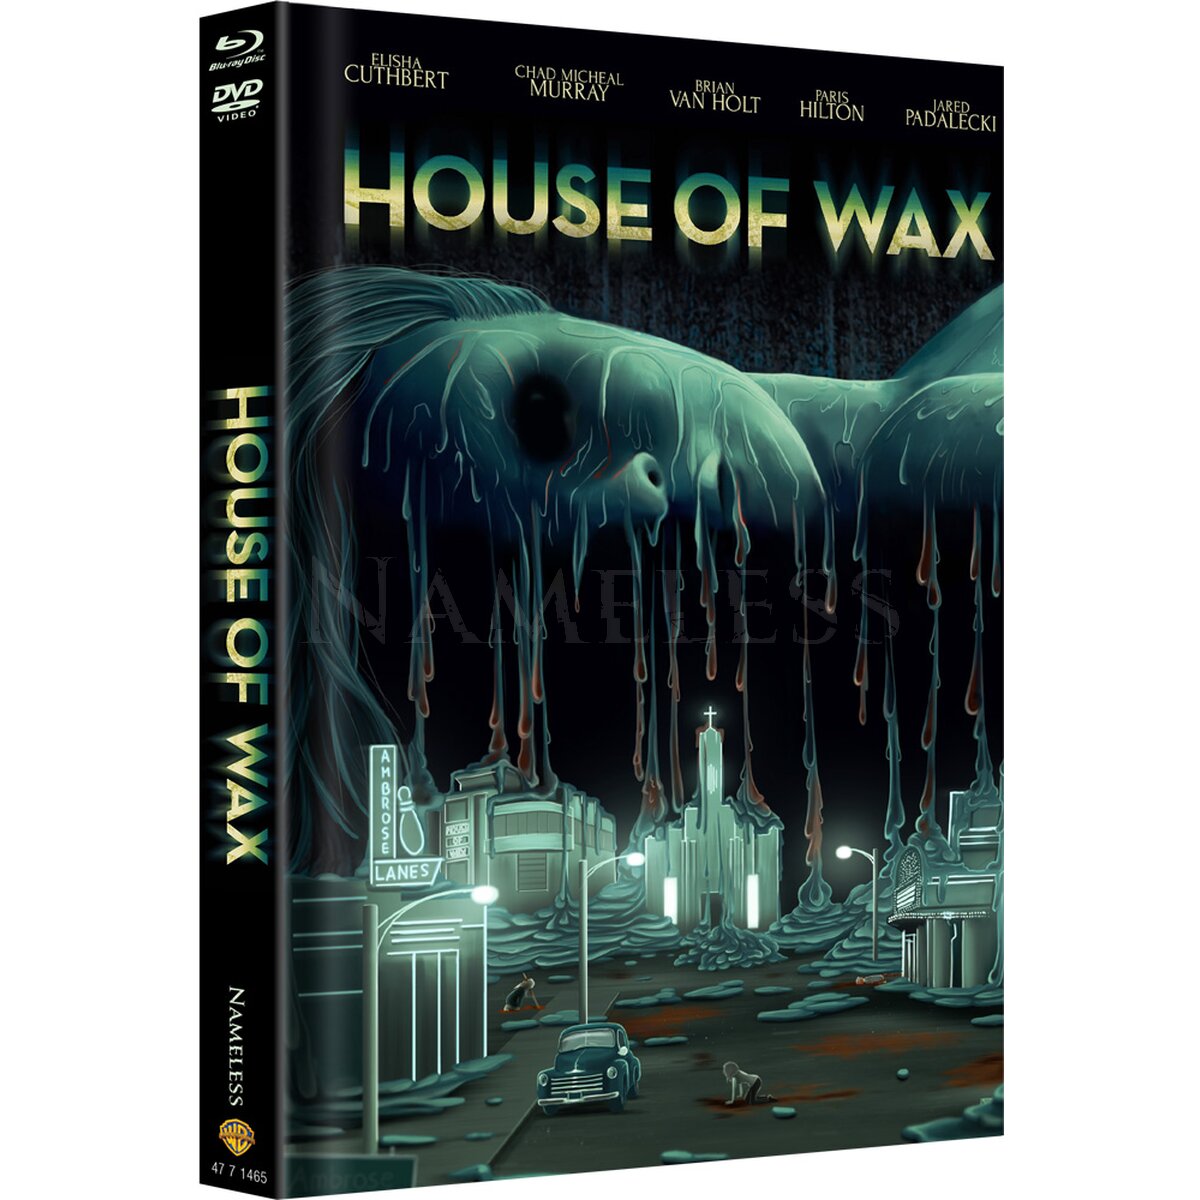 HOUSE OF WAX – COVER B – ARTWORK